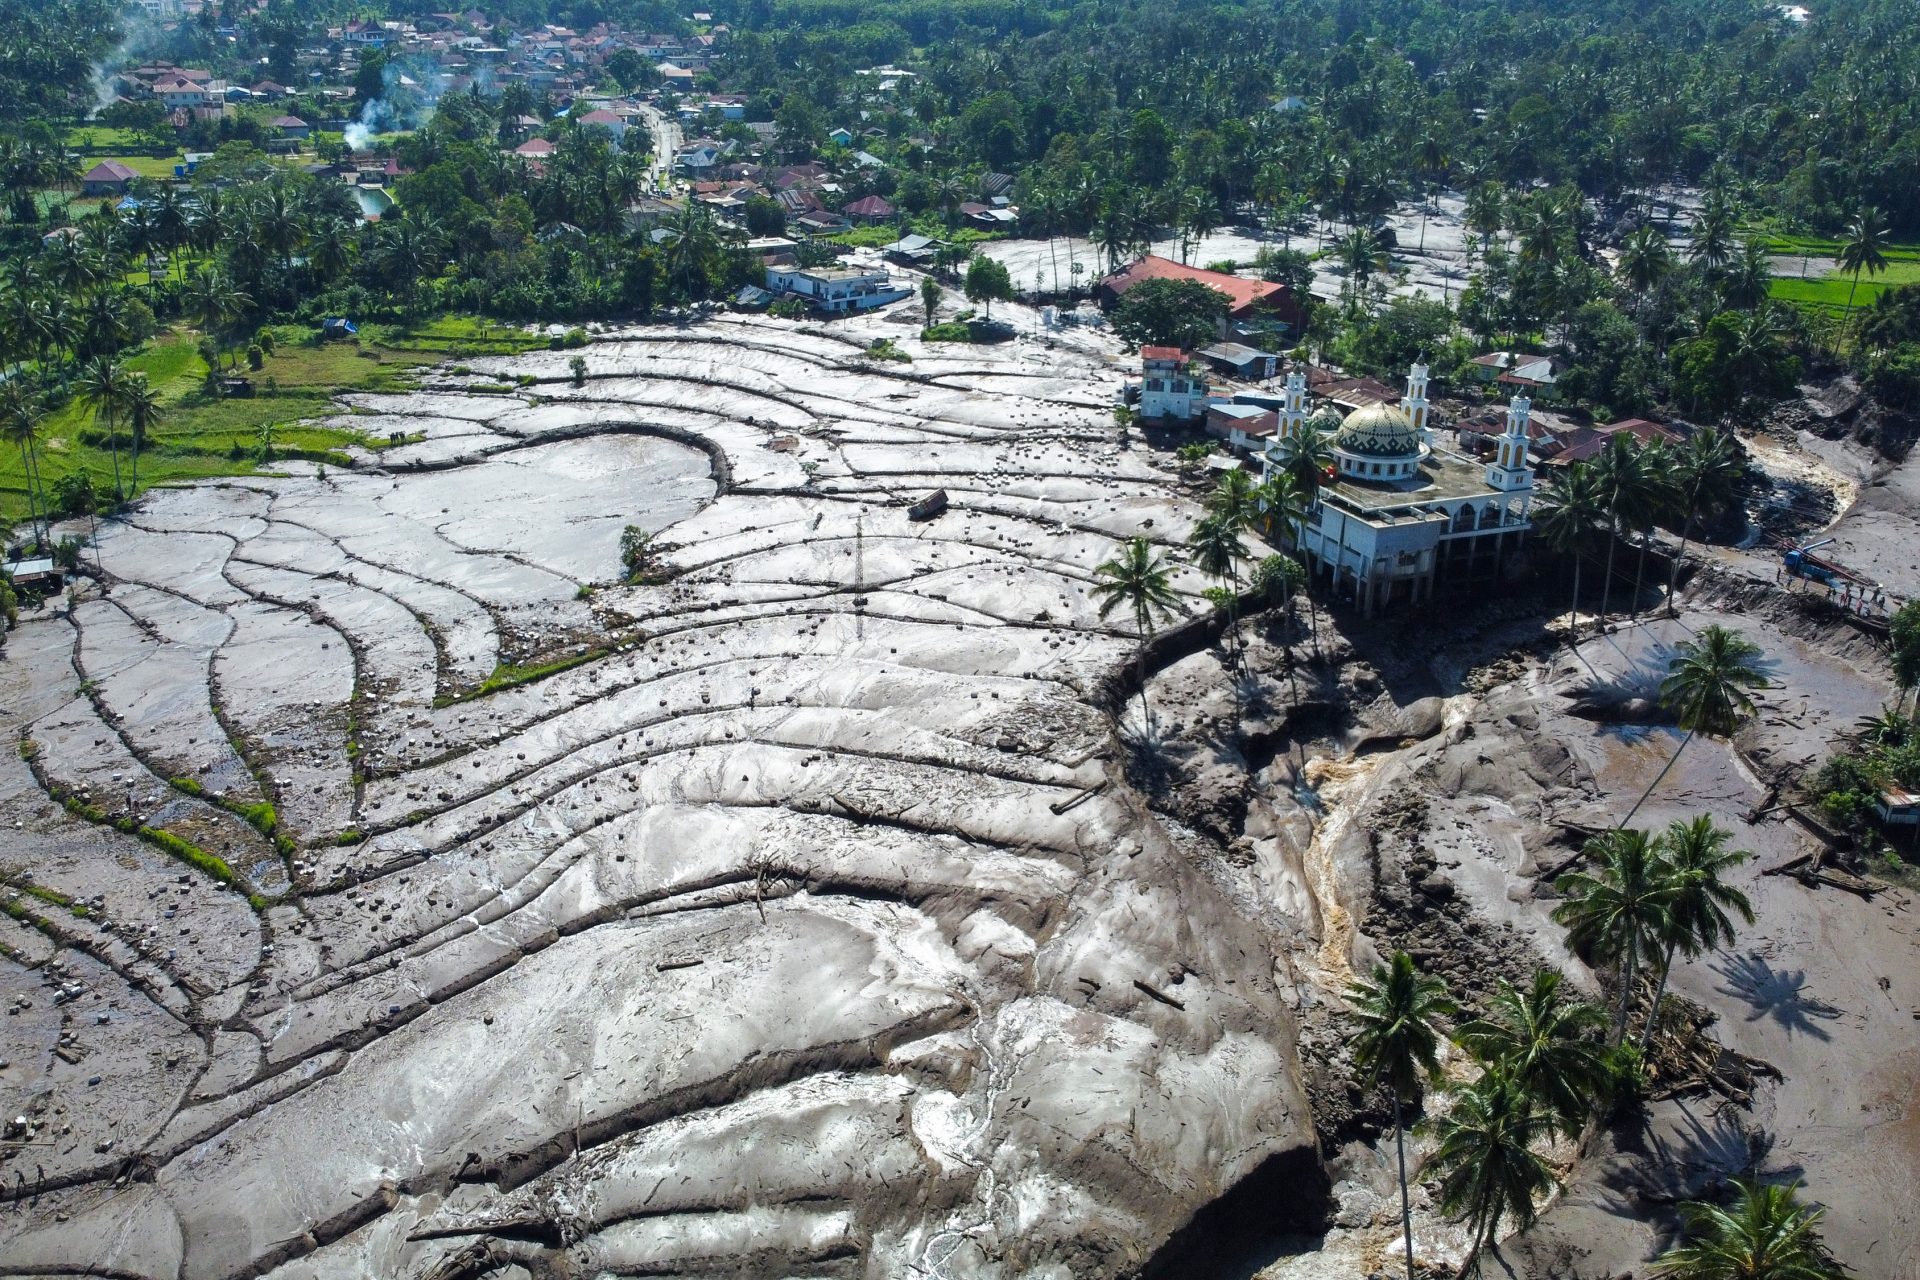 In pictures: Cold lava and floods kill 41 people in Indonesia